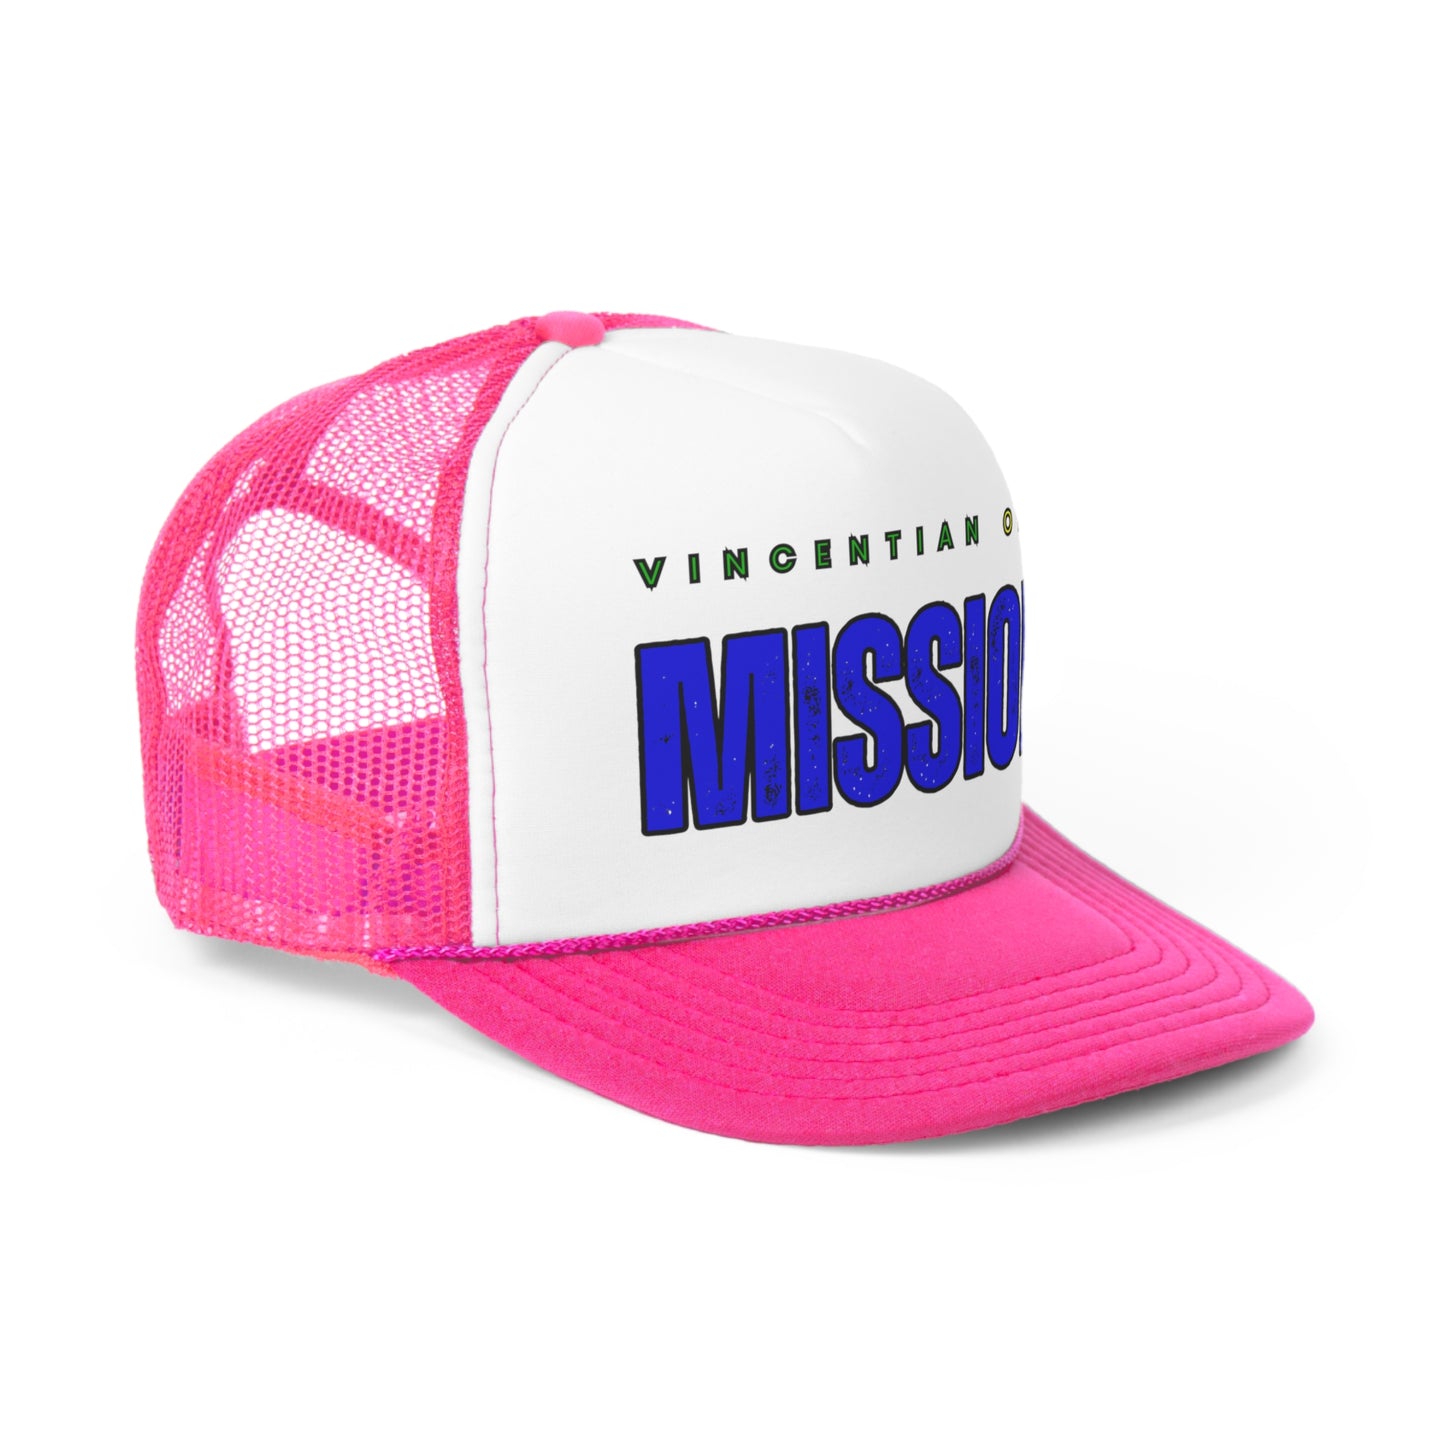 Vincentian on a Mission Trucker Caps